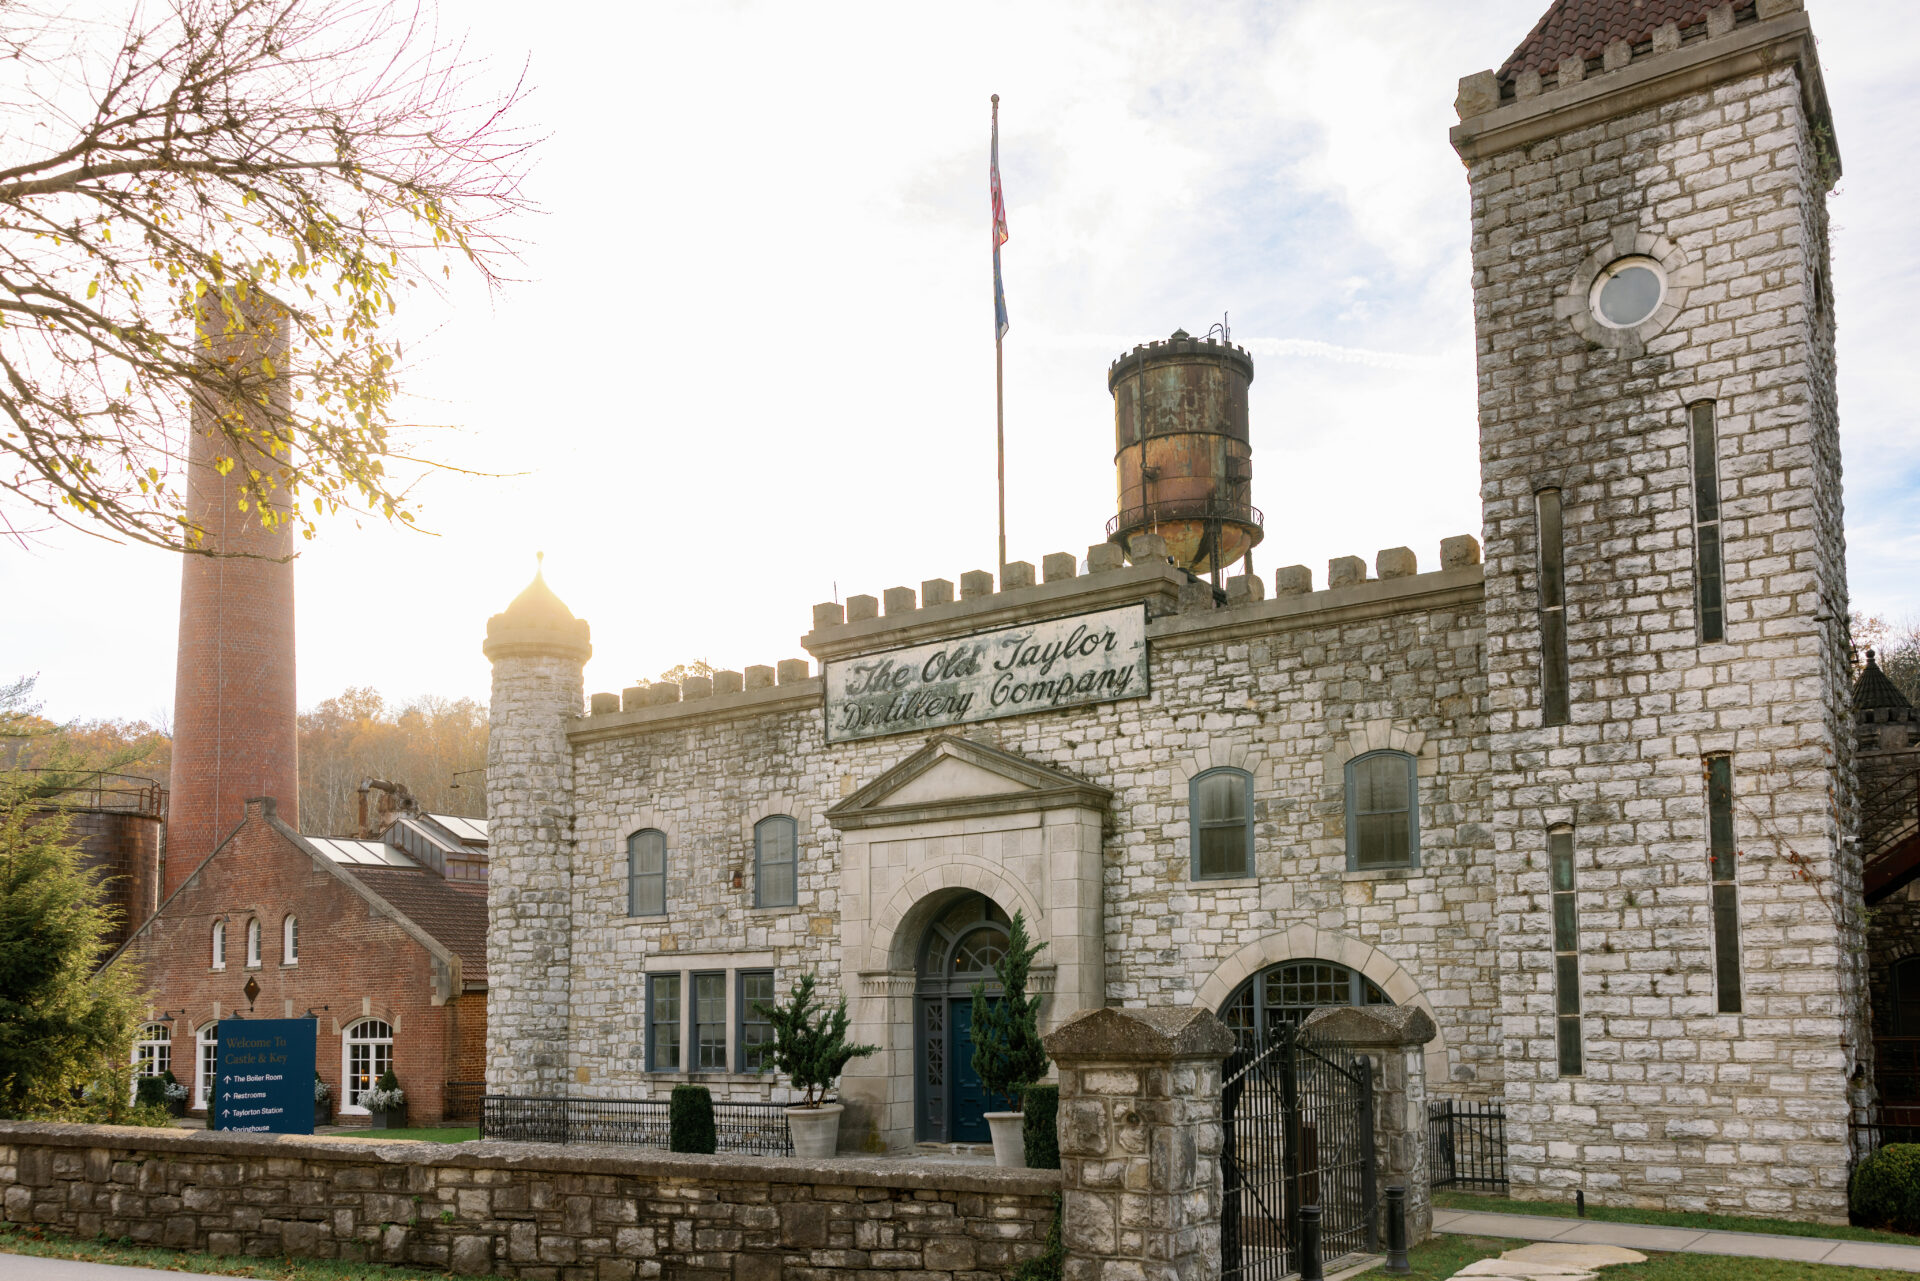 The Old Taylor Distillery Company that was transformed into the Castle & Key Distillery